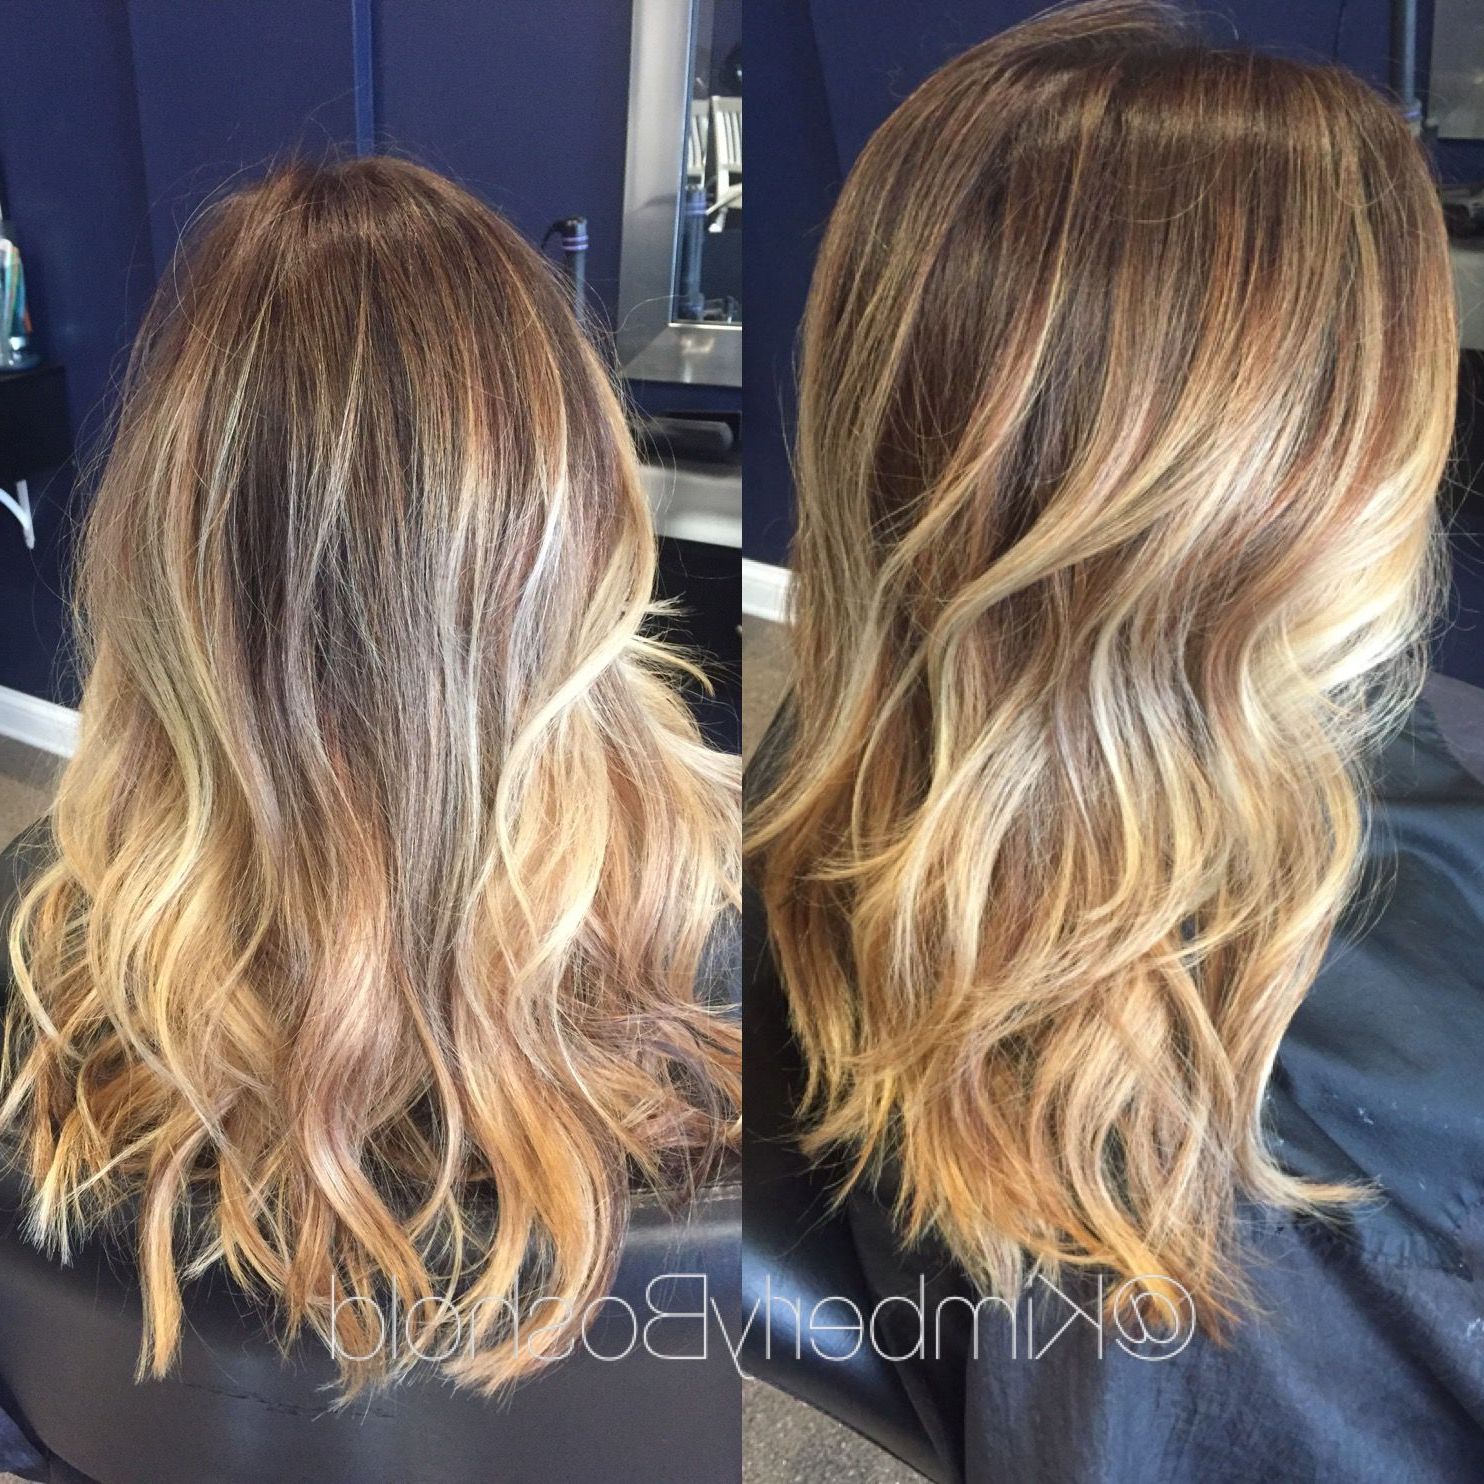 Immagine Correlata | Beige Blonde Balayage, Hair Projects With Regard To Warm Blonde Balayage Hairstyles (View 8 of 20)